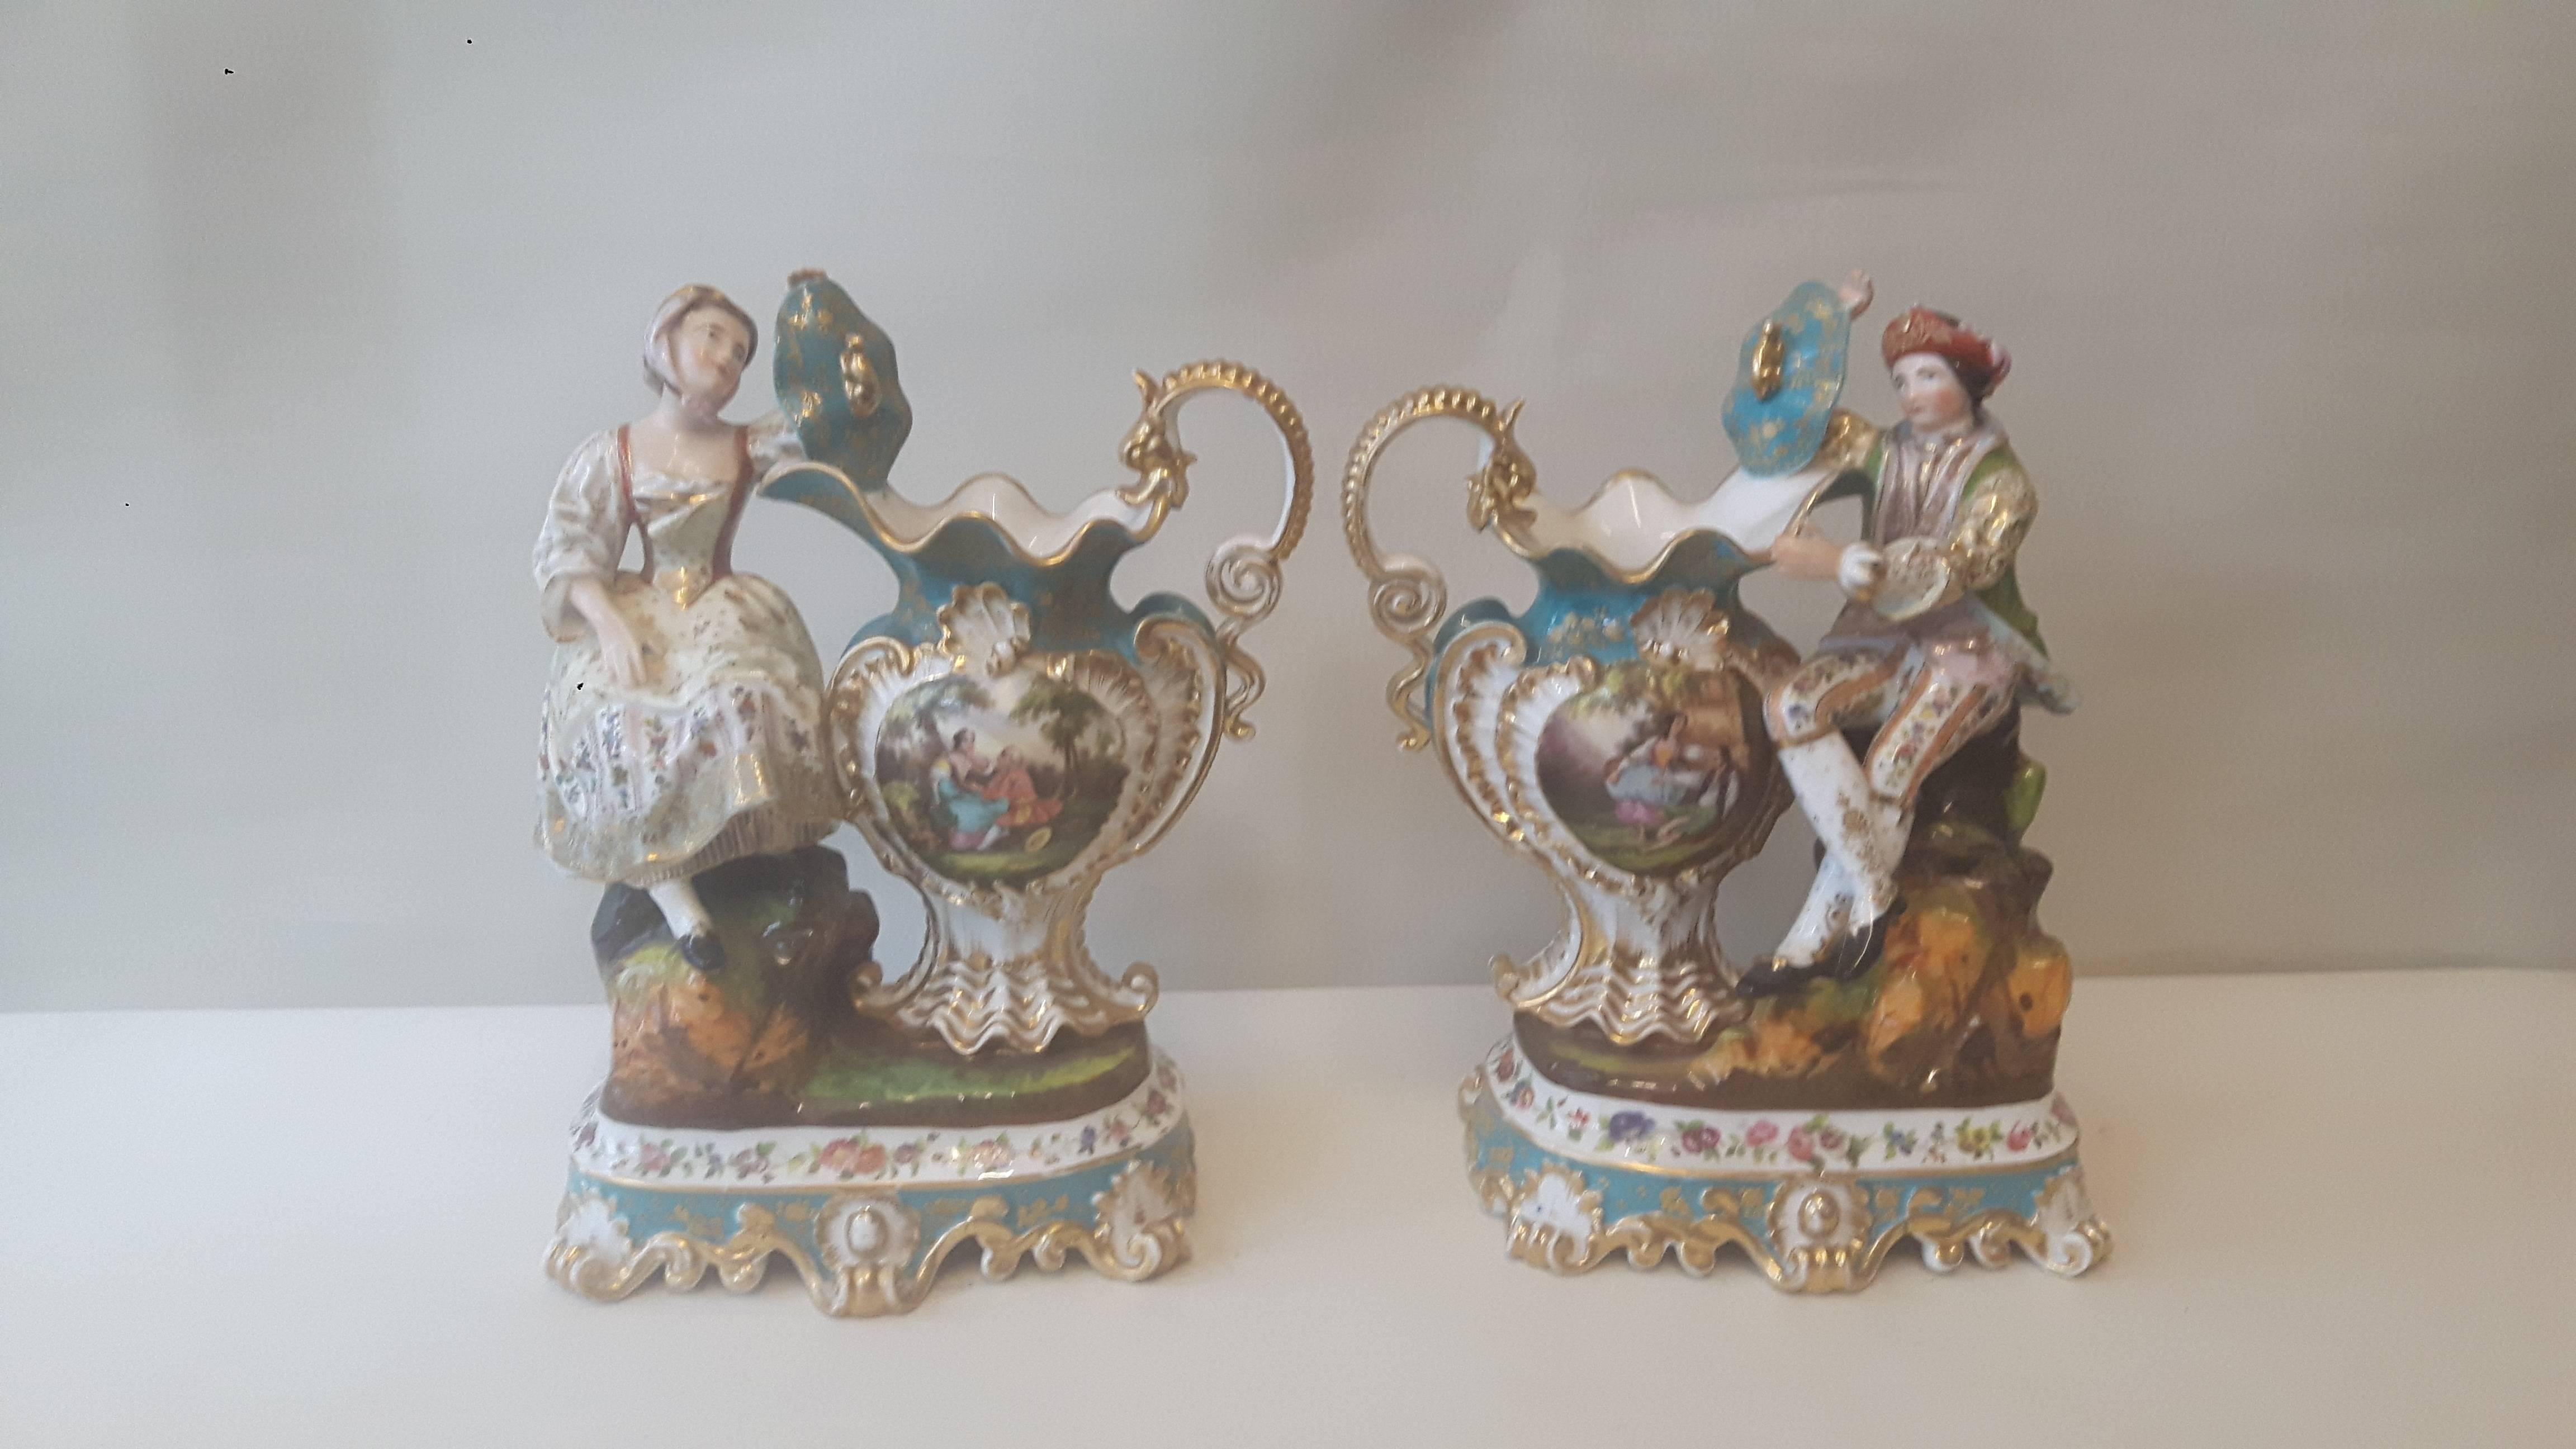 A very unusual pair of figurines of a lady and her beau in C18 dress by Jacob Petit, sitting besides an elaborately decorated urn with hand-painted cartouches after Watteau. Each urn has an intricate gilded handle in the shape of a dragon and the